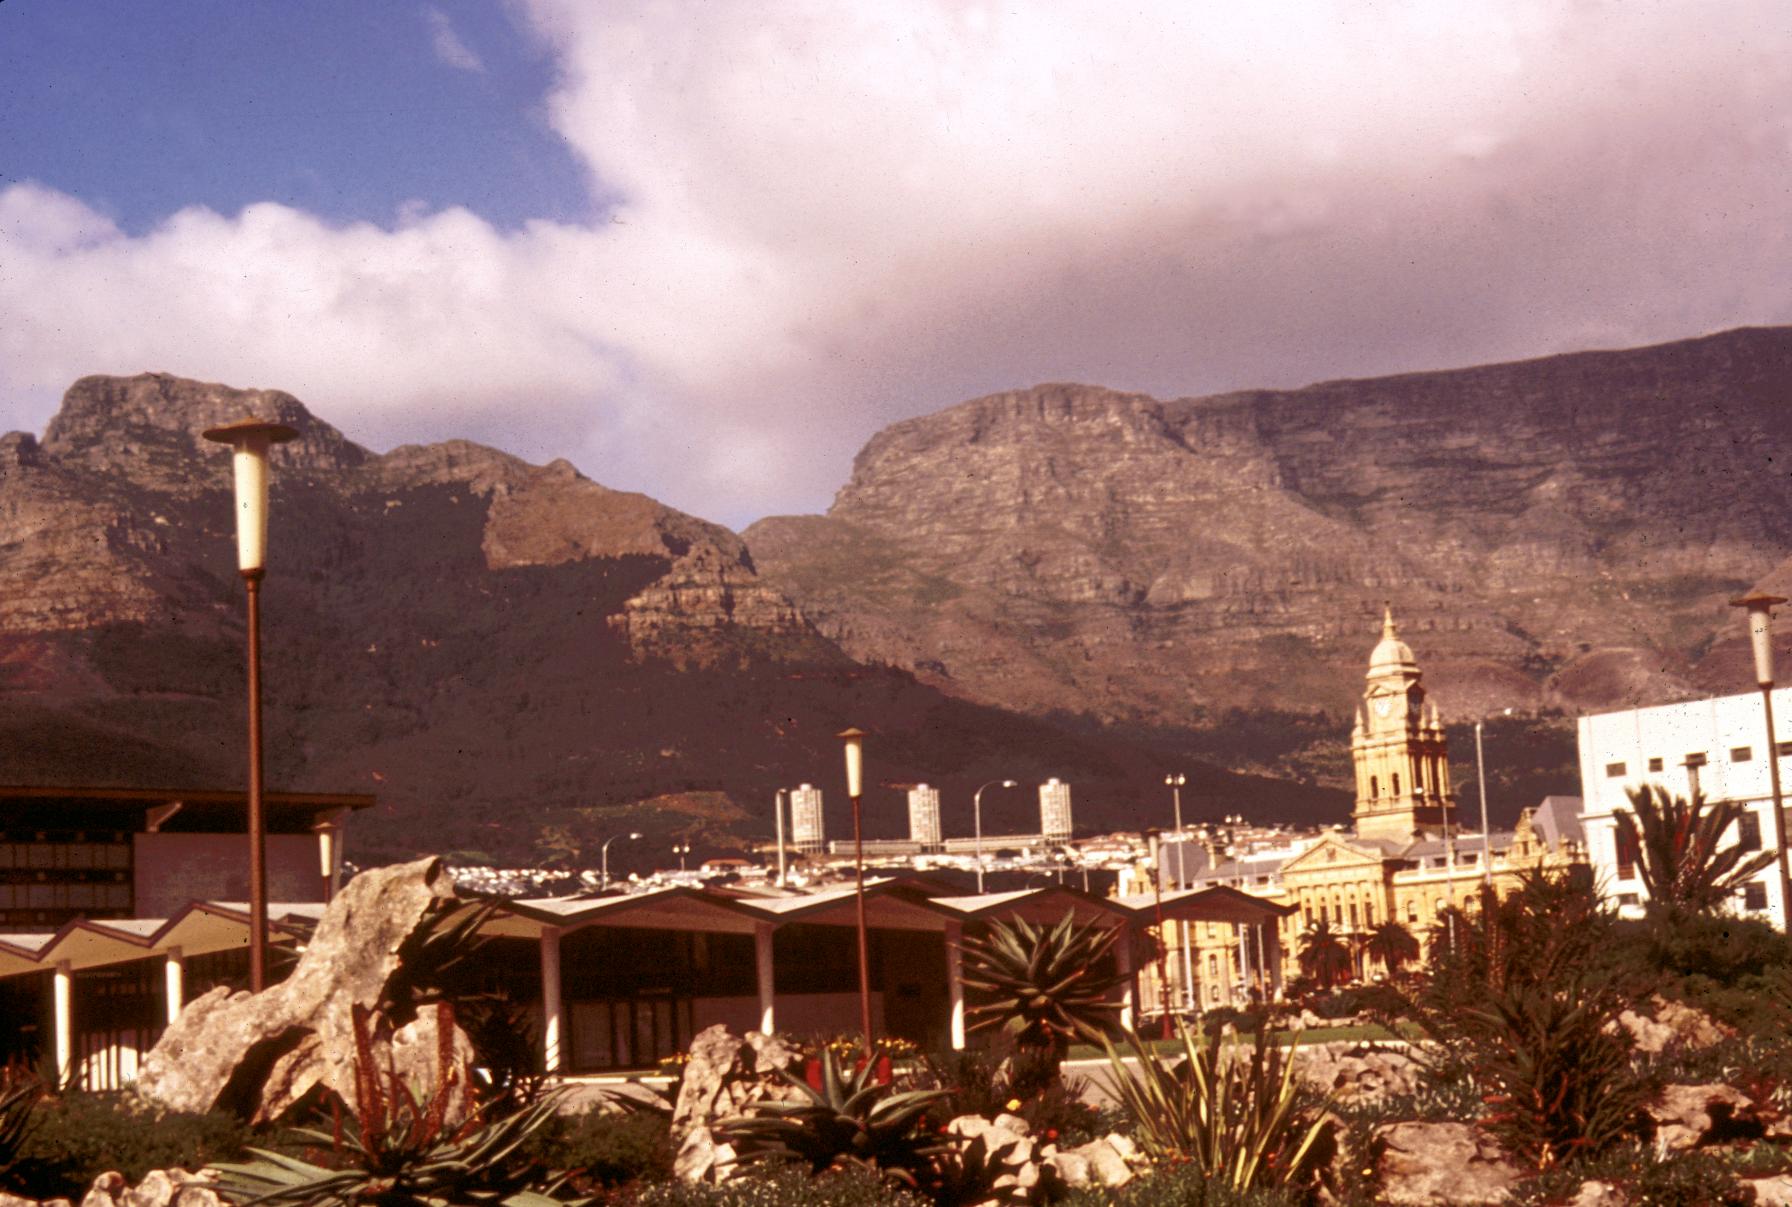 View of Cape Town with Train Station in Foreground, Tower of Synagogue, and Table Mountain